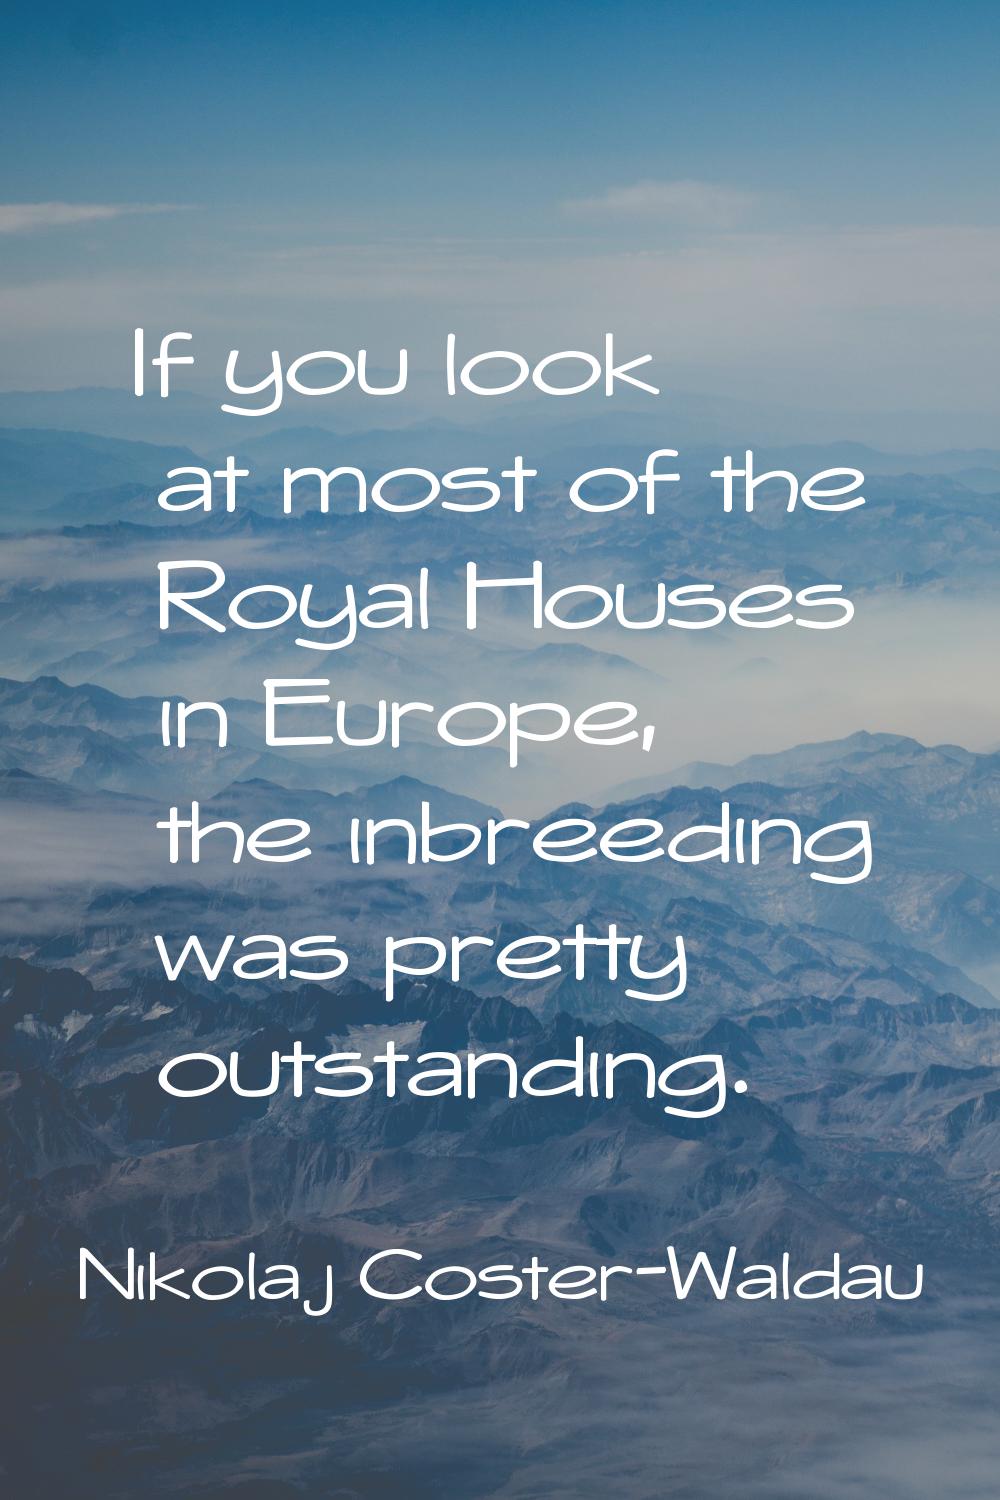 If you look at most of the Royal Houses in Europe, the inbreeding was pretty outstanding.